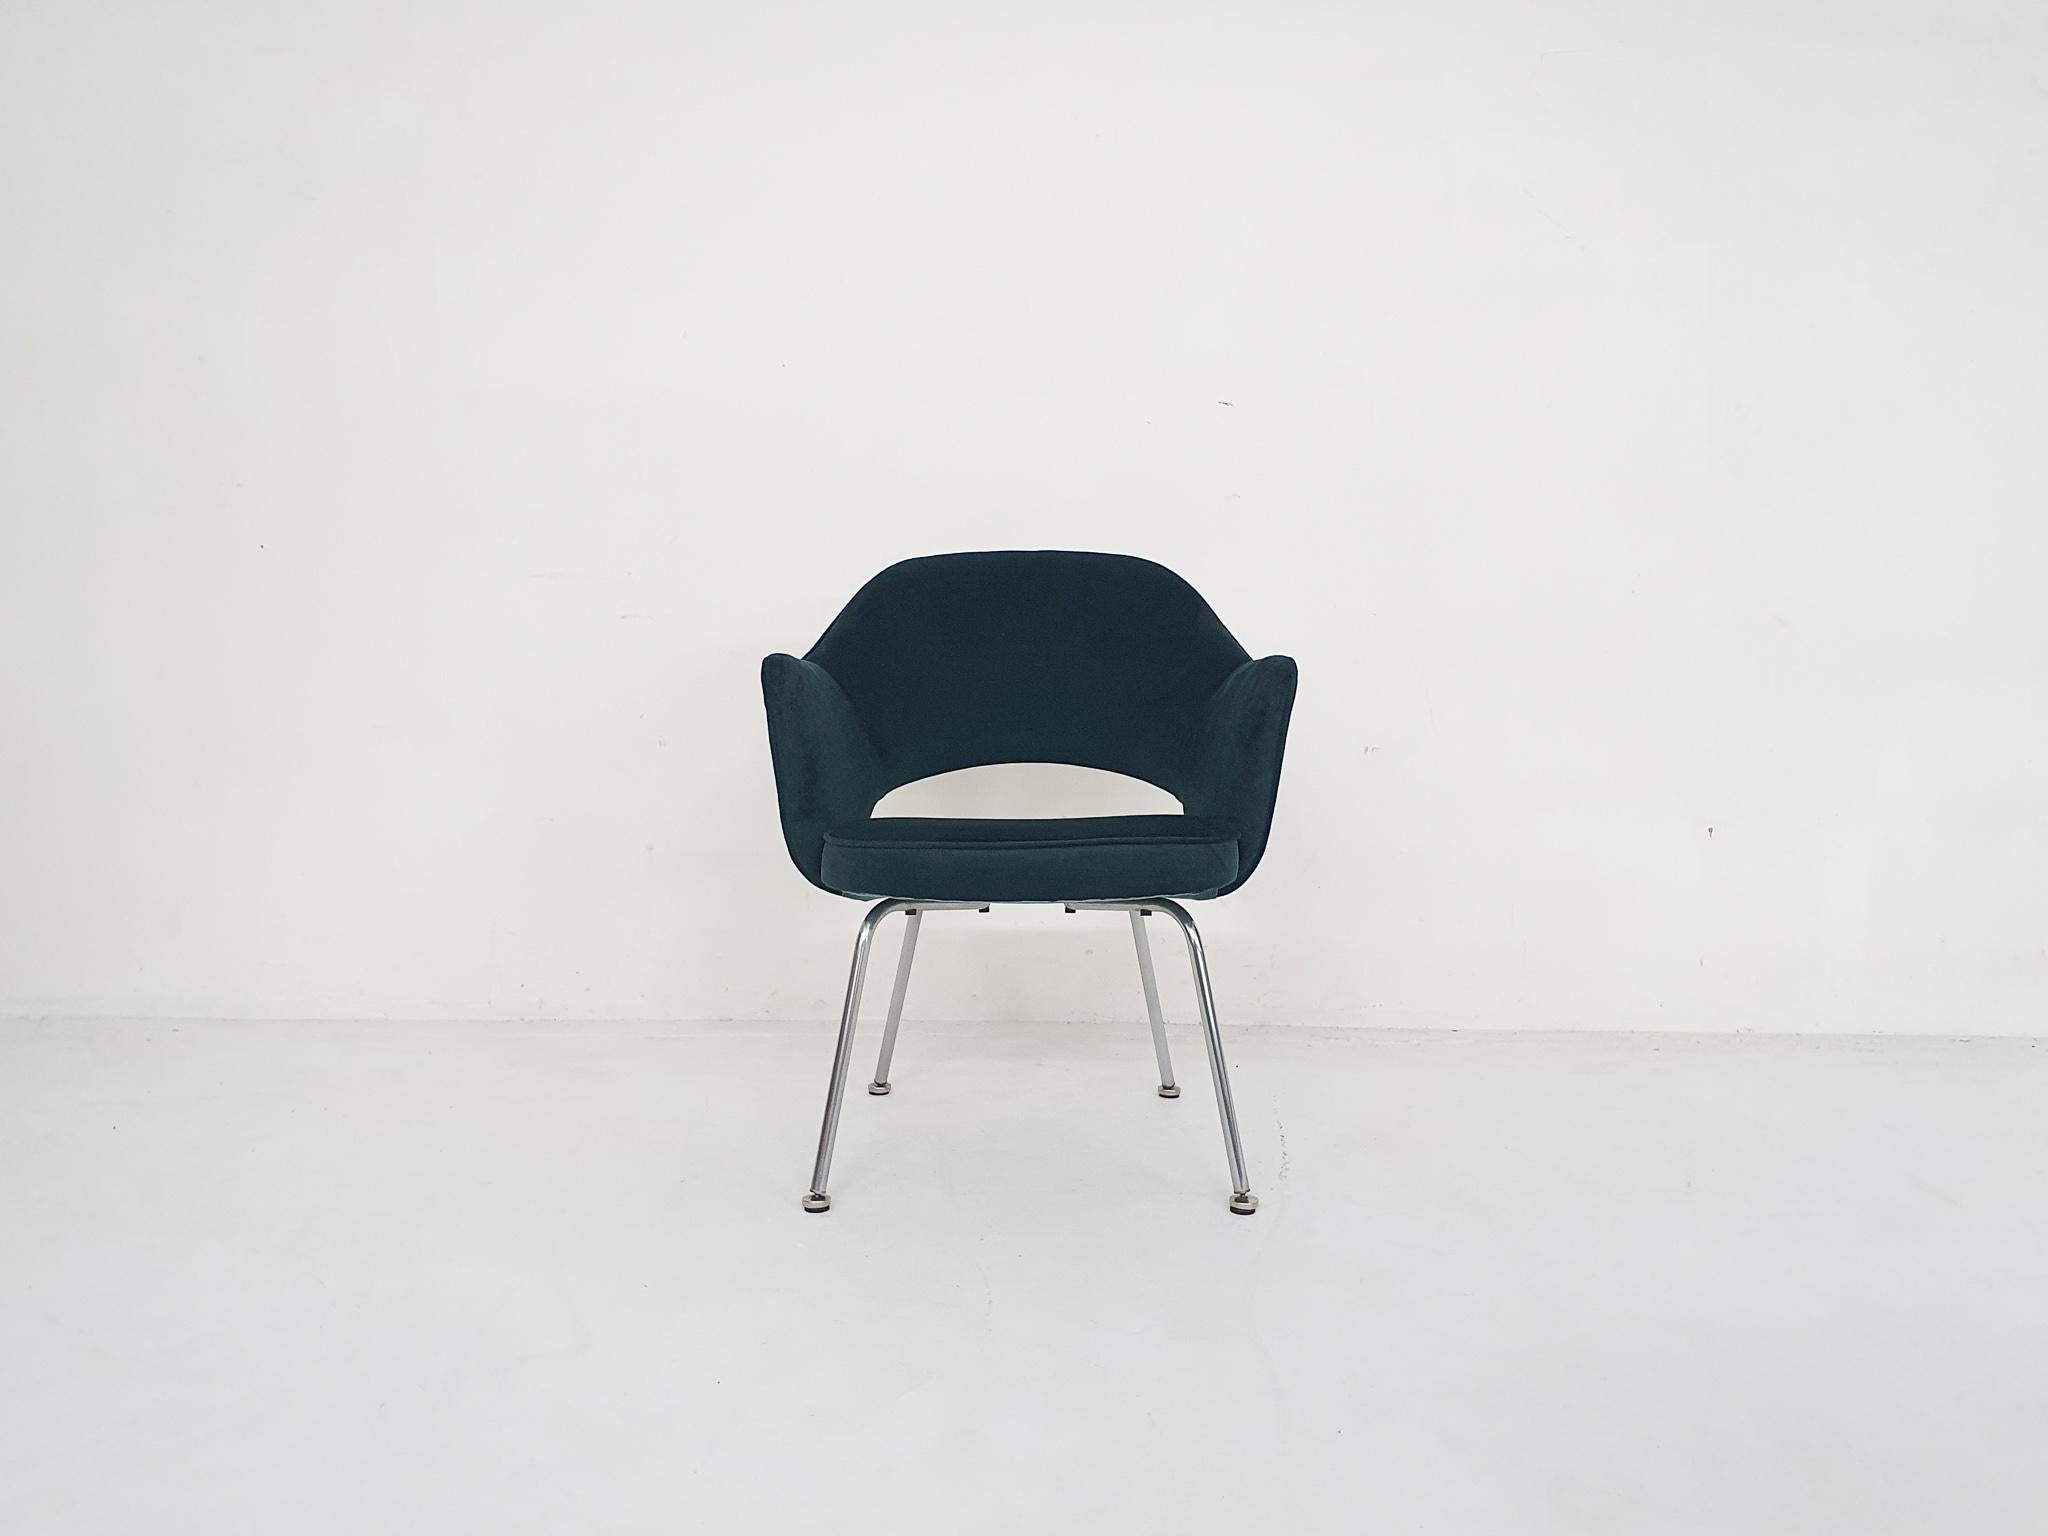 Eero Saarinen for Knoll lounge chair with new petrol green velvet upholstery.
The chair is not marked.


Eero Saarinen is one of the most iconic and recognized designers from the mid-century. He was a Finnish-American architect famous for designing